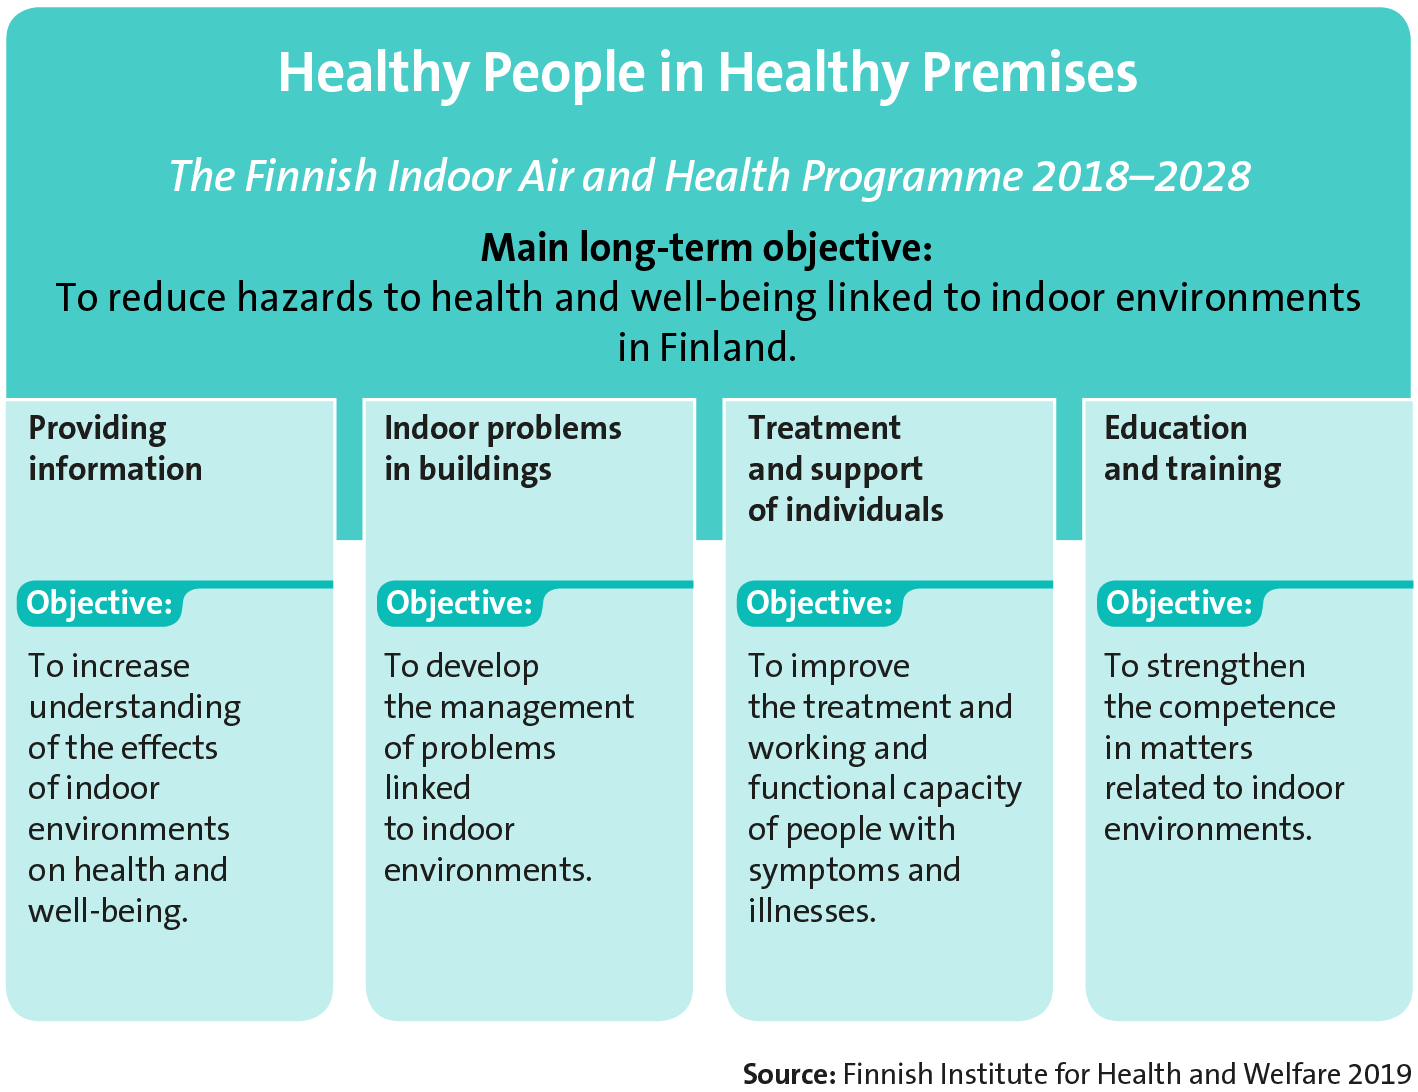 Four key objectives for The Finnish Indoor Air and Health Programme 2018-2028